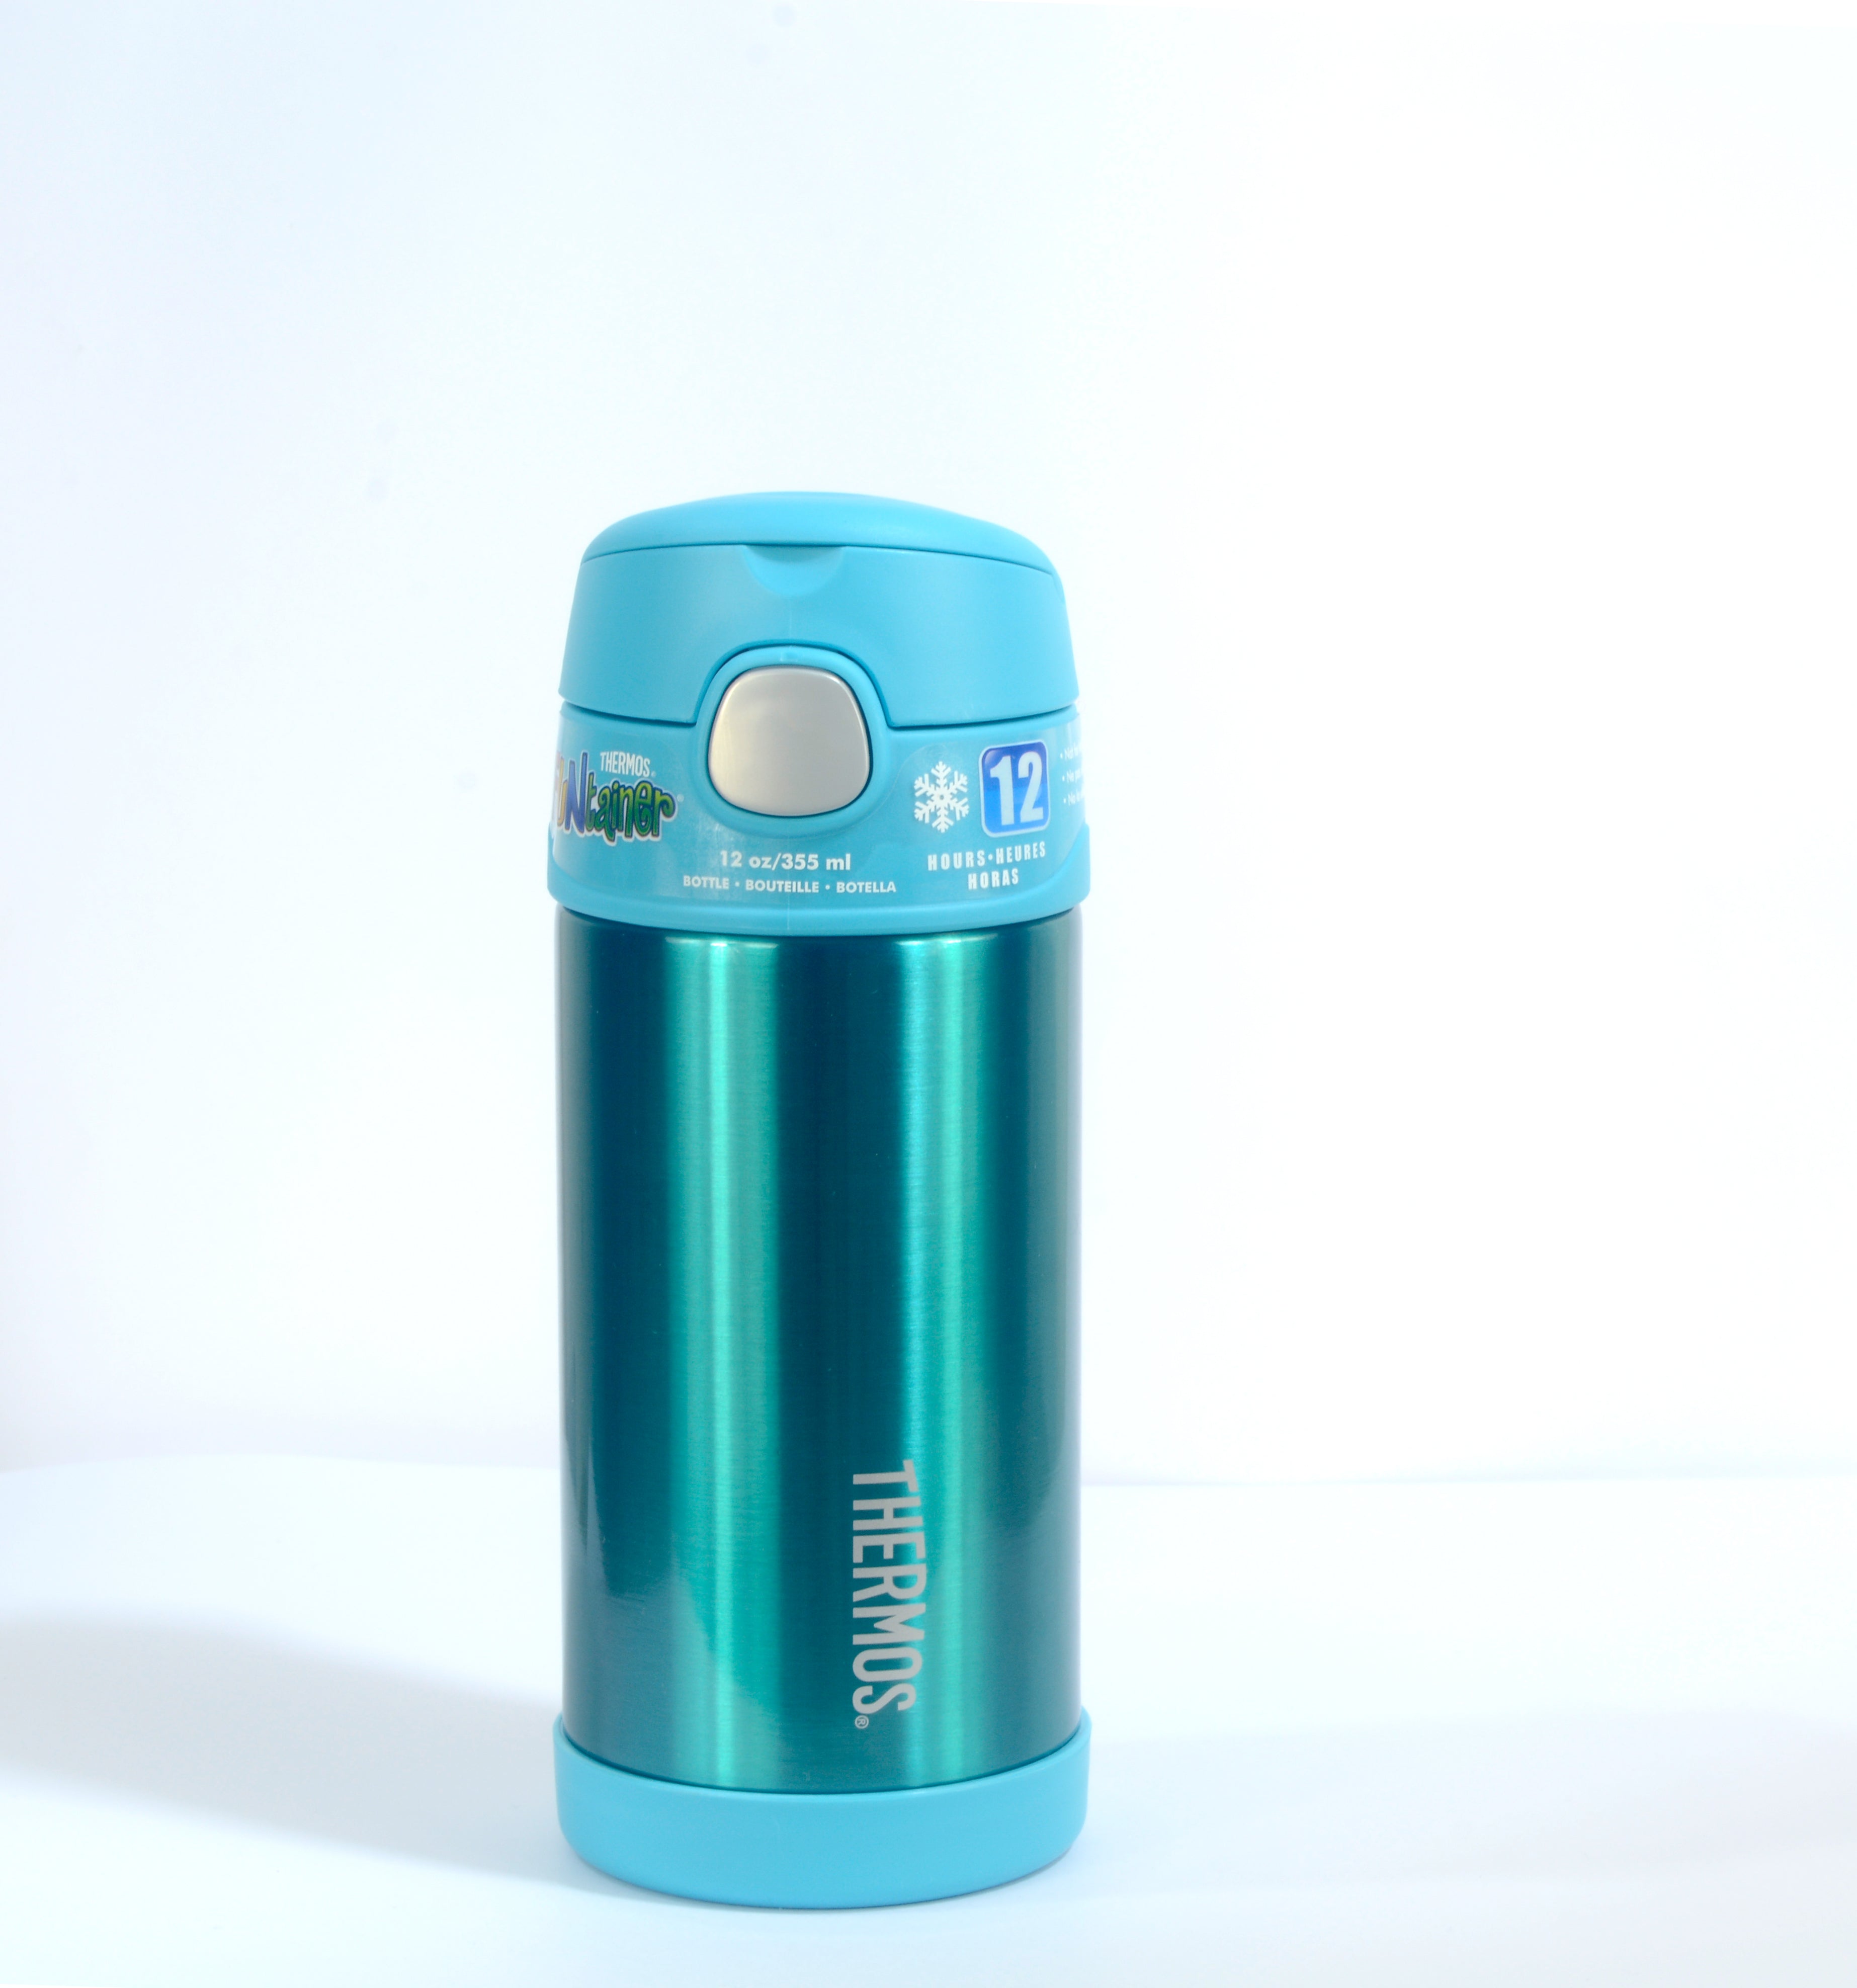 Thermos Funtainer Stainless Steel Hydration/Water Bottle-Teal 355 ml